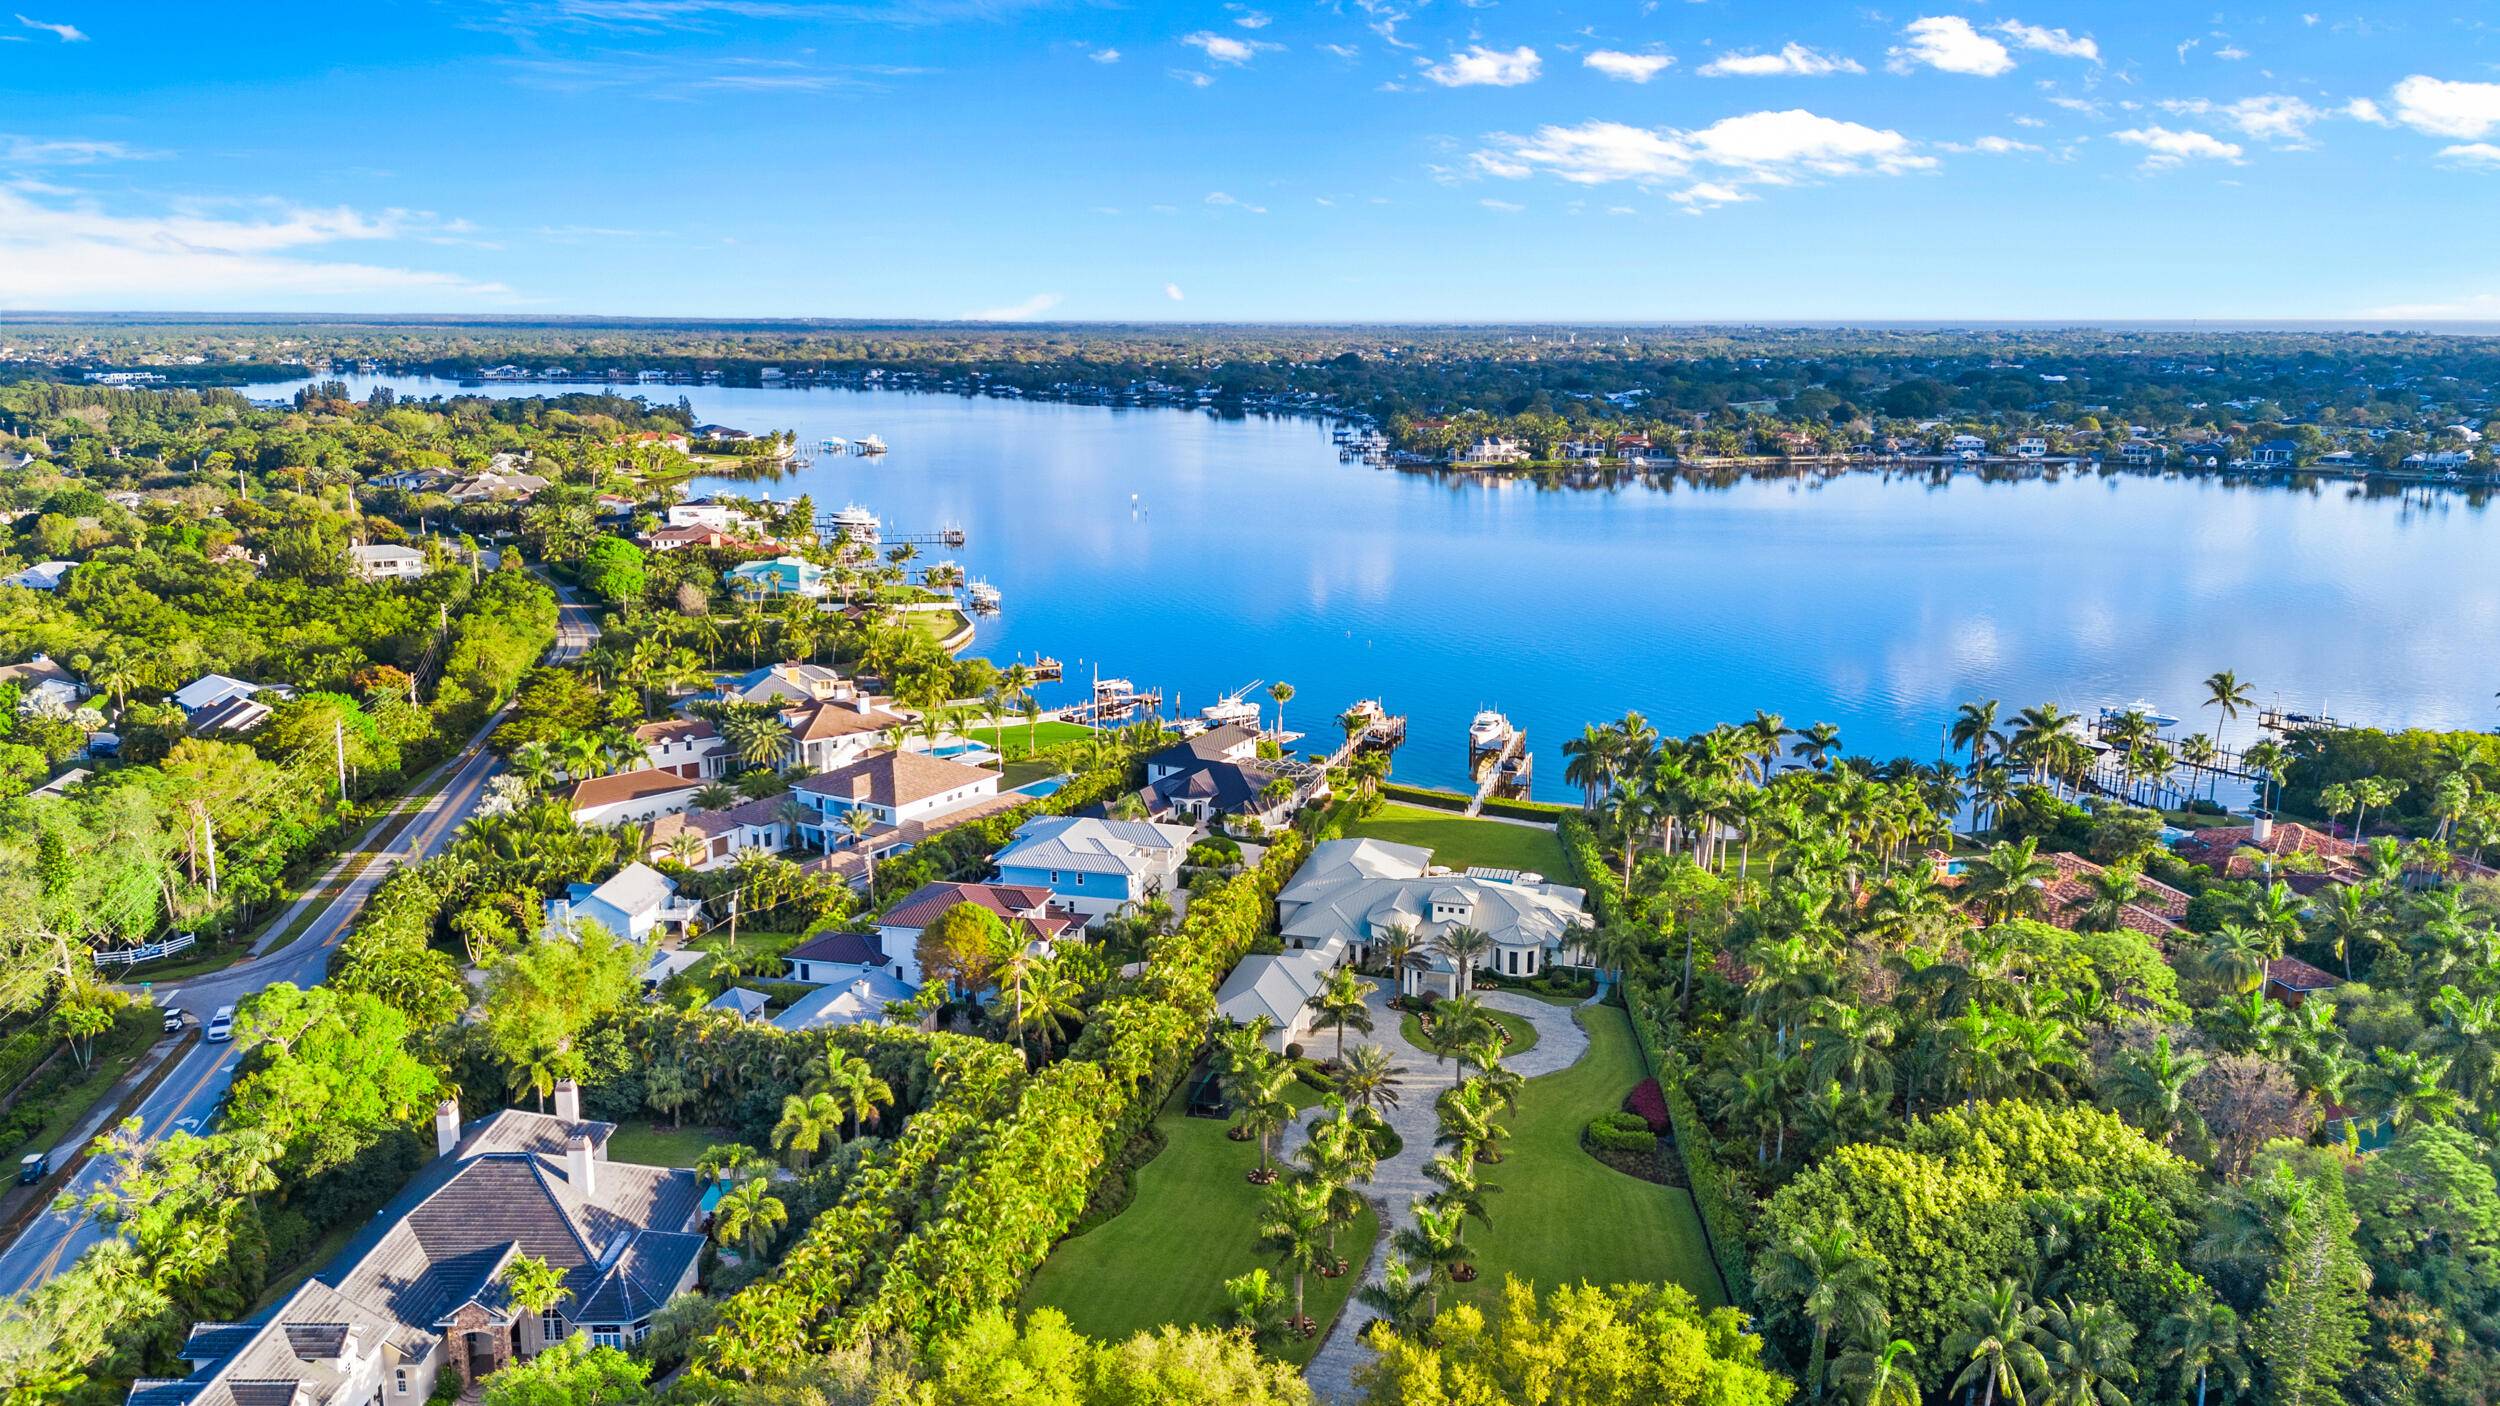 Located on the scenic and wild Loxahatchee River, this estate has 5bd, 6bth, 4 car garage.